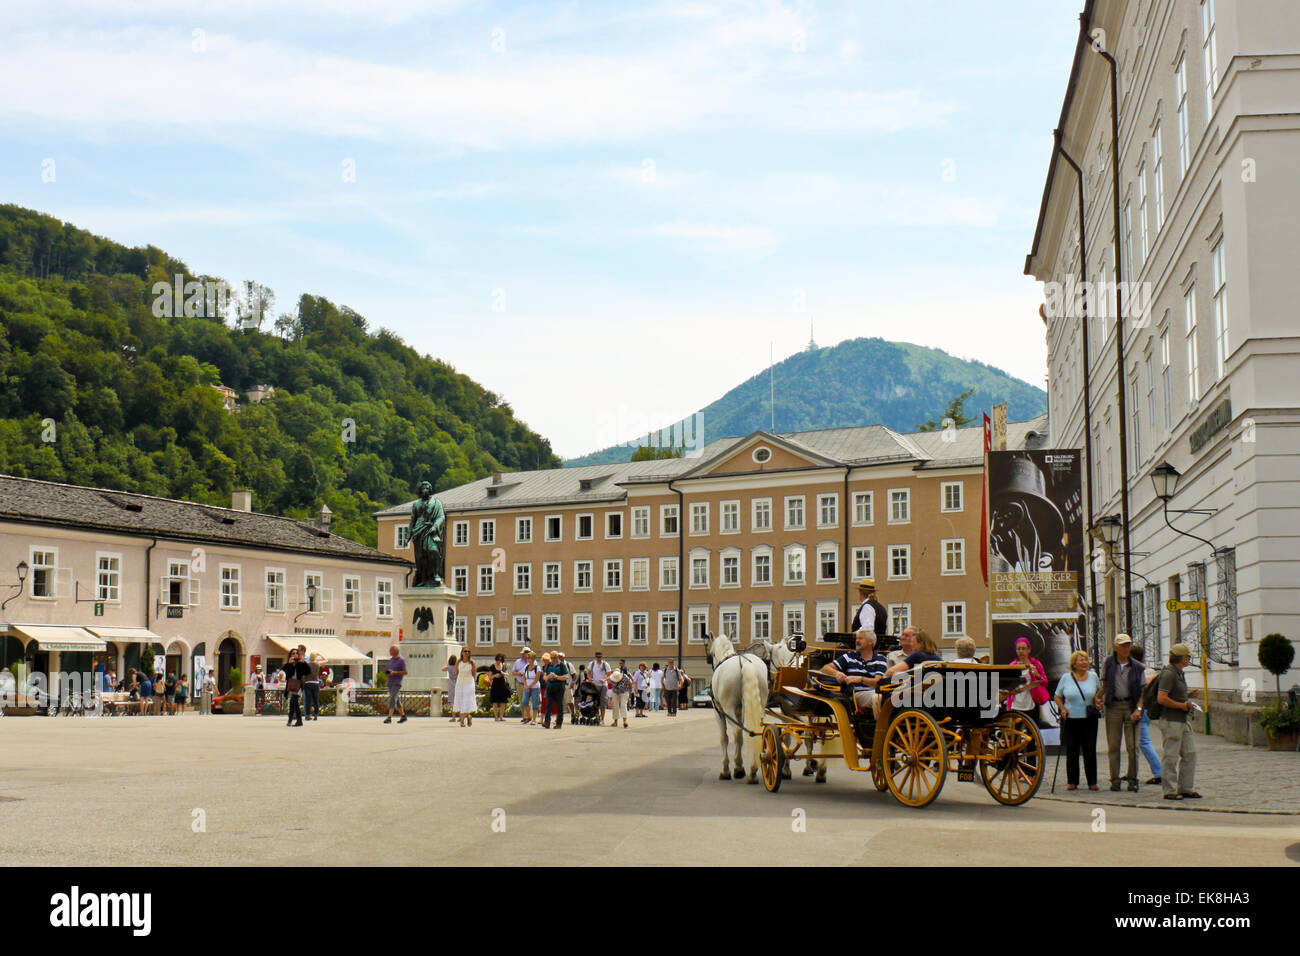 SALZBURG - JULY 3: Tourists sightseeing on one of the most famous squares in Austria - Mozartplatz on July 3, 2013 in Salzburg. Stock Photo